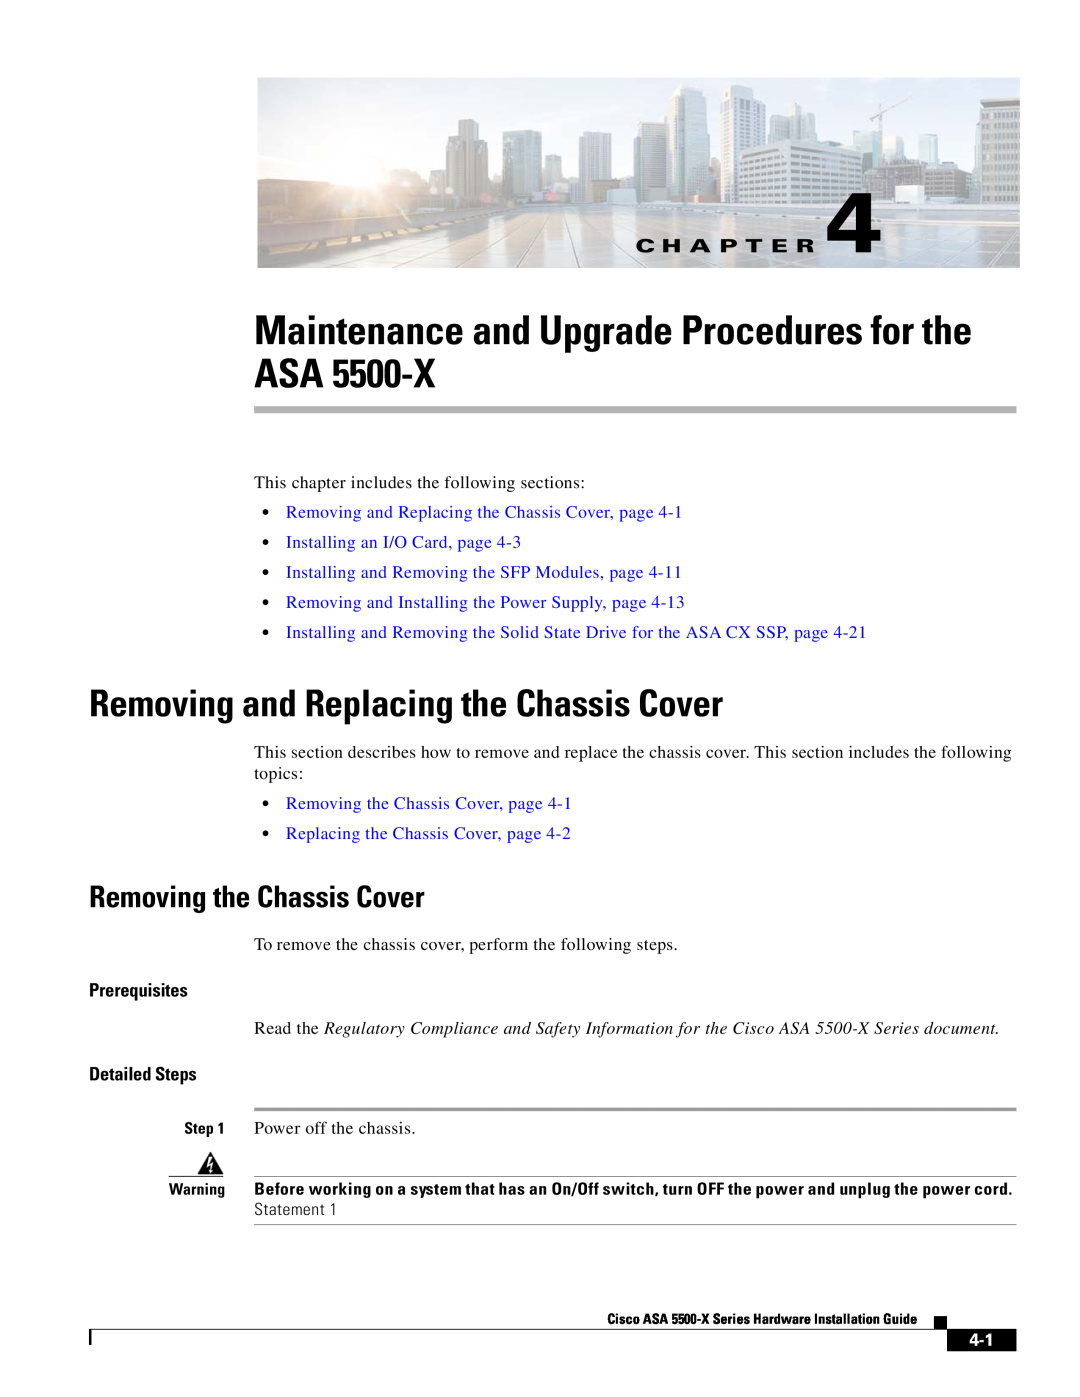 Cisco Systems ASA5515K9 manual Maintenance and Upgrade Procedures for the ASA, Removing and Replacing the Chassis Cover 